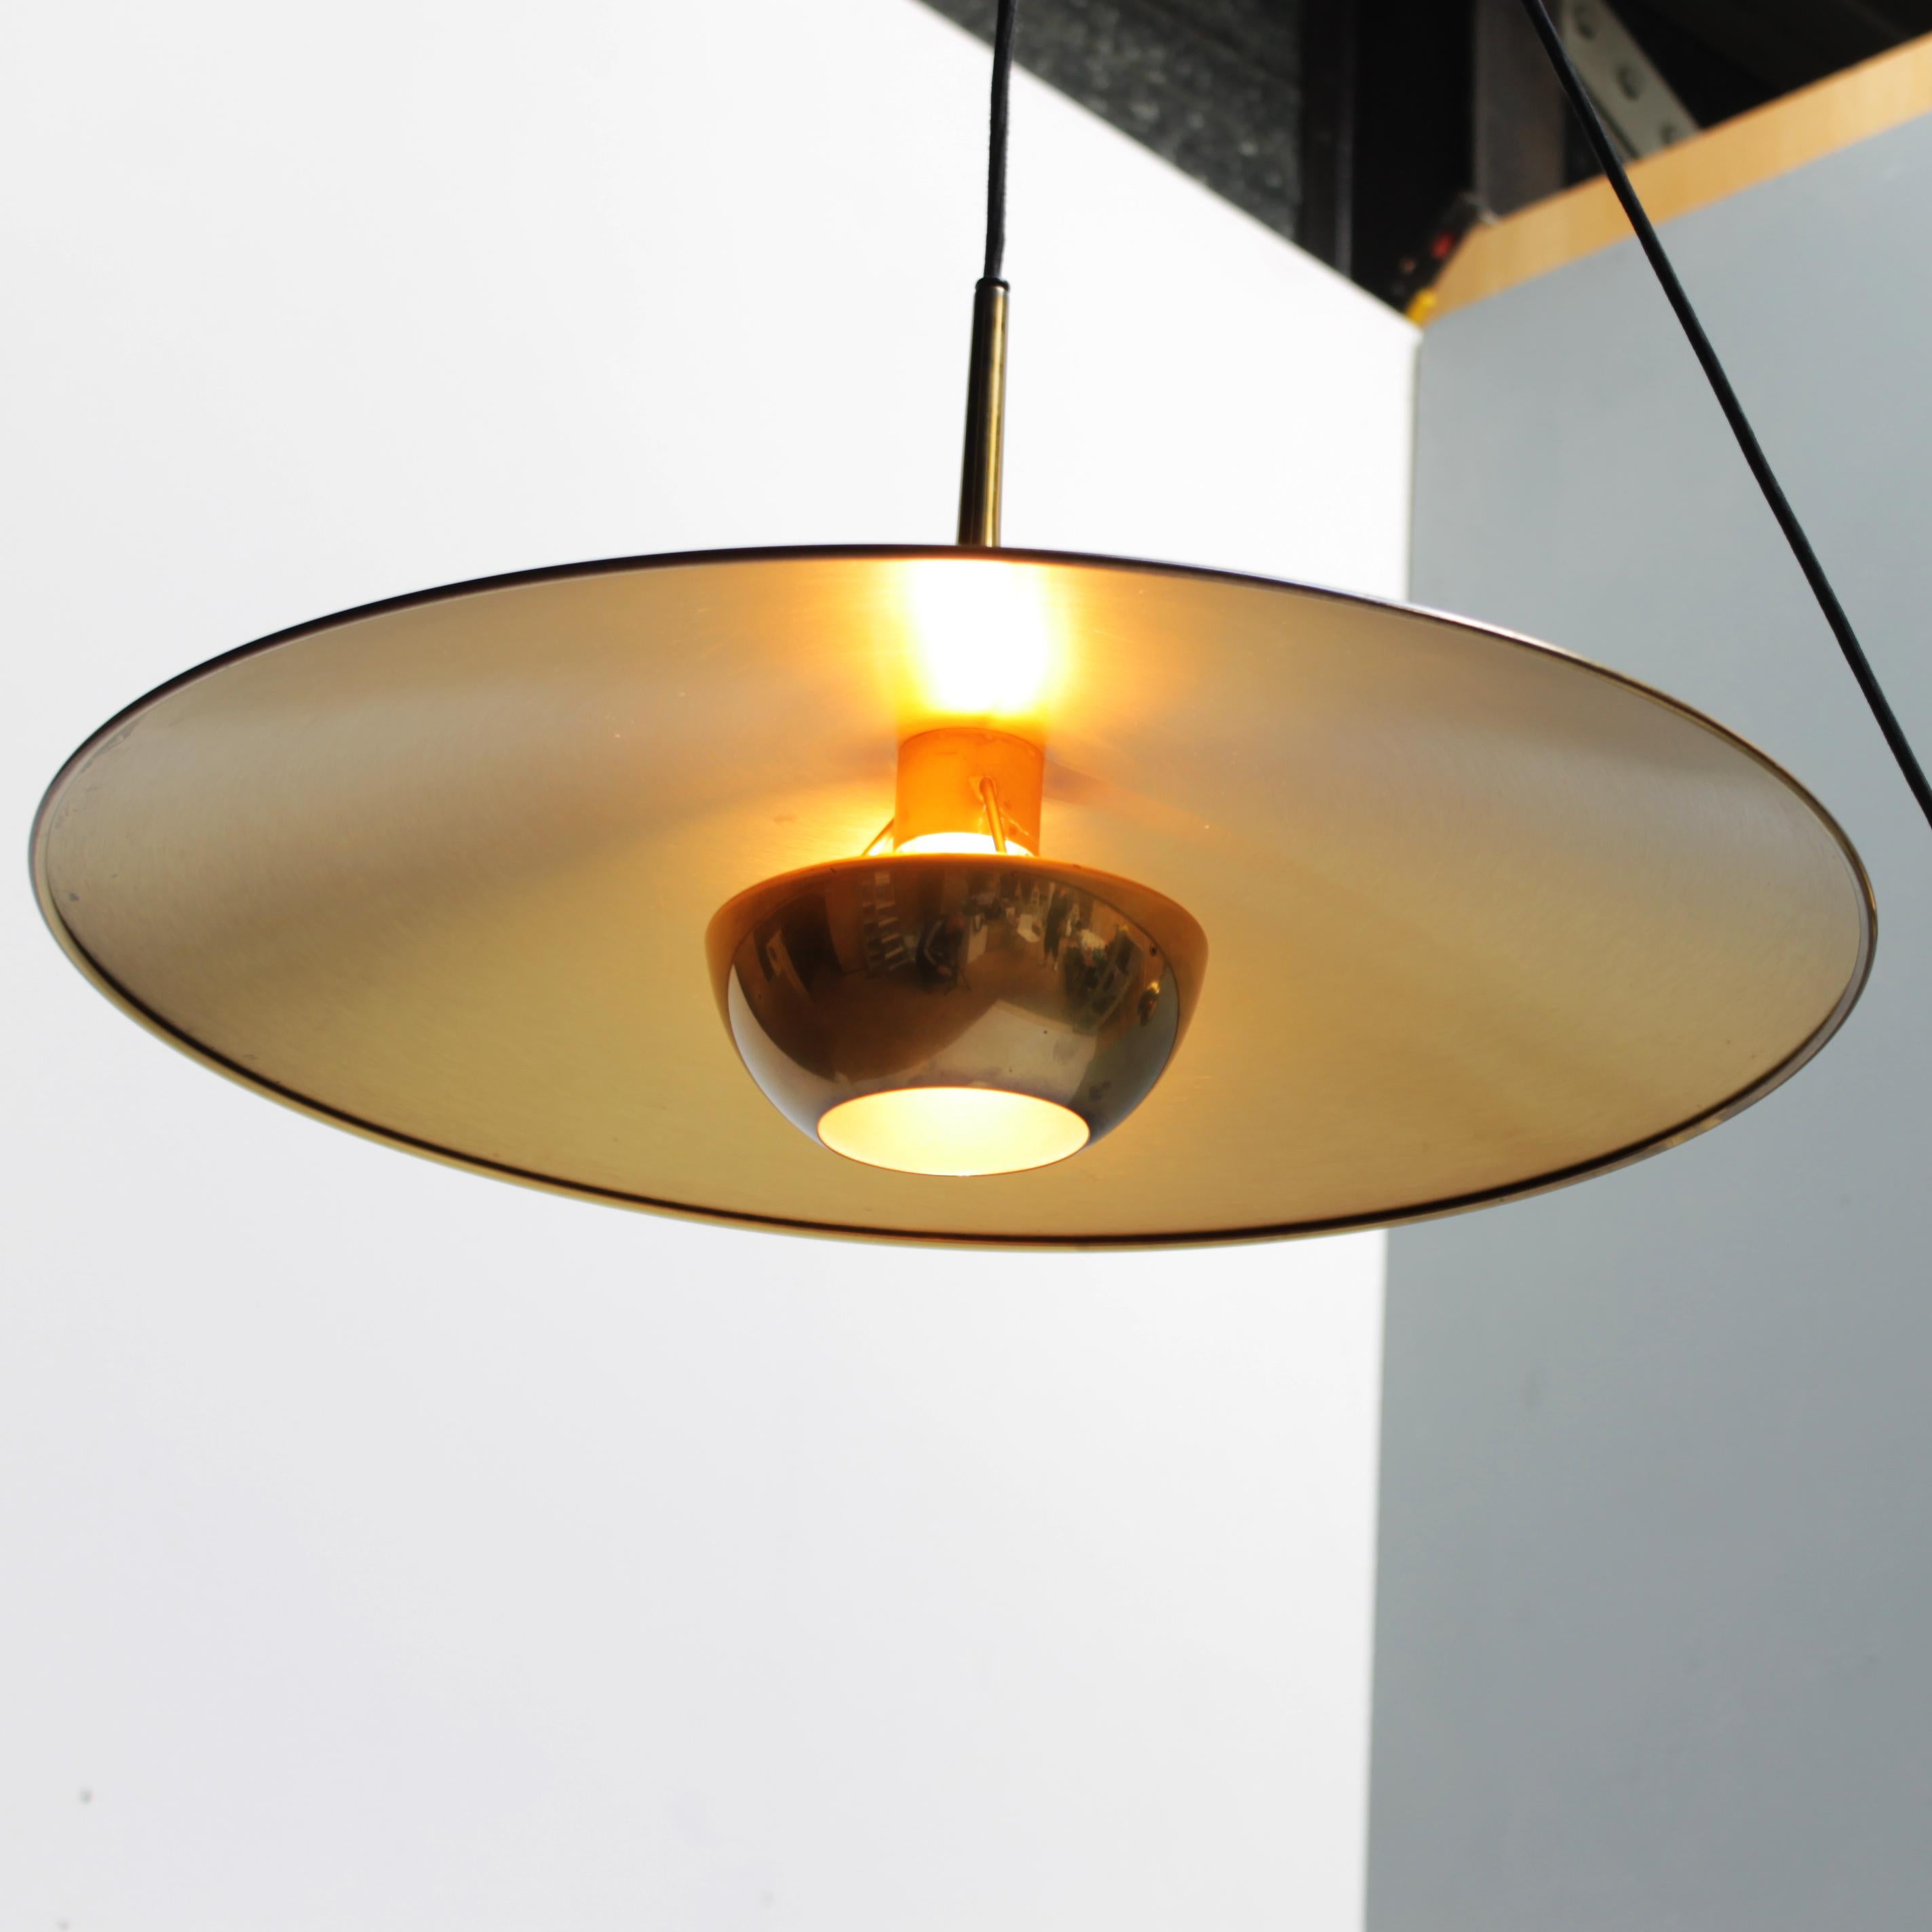 Vintage Brass Counterweight Pendant 'Onos 55' by Florian Schulz, Germany 1